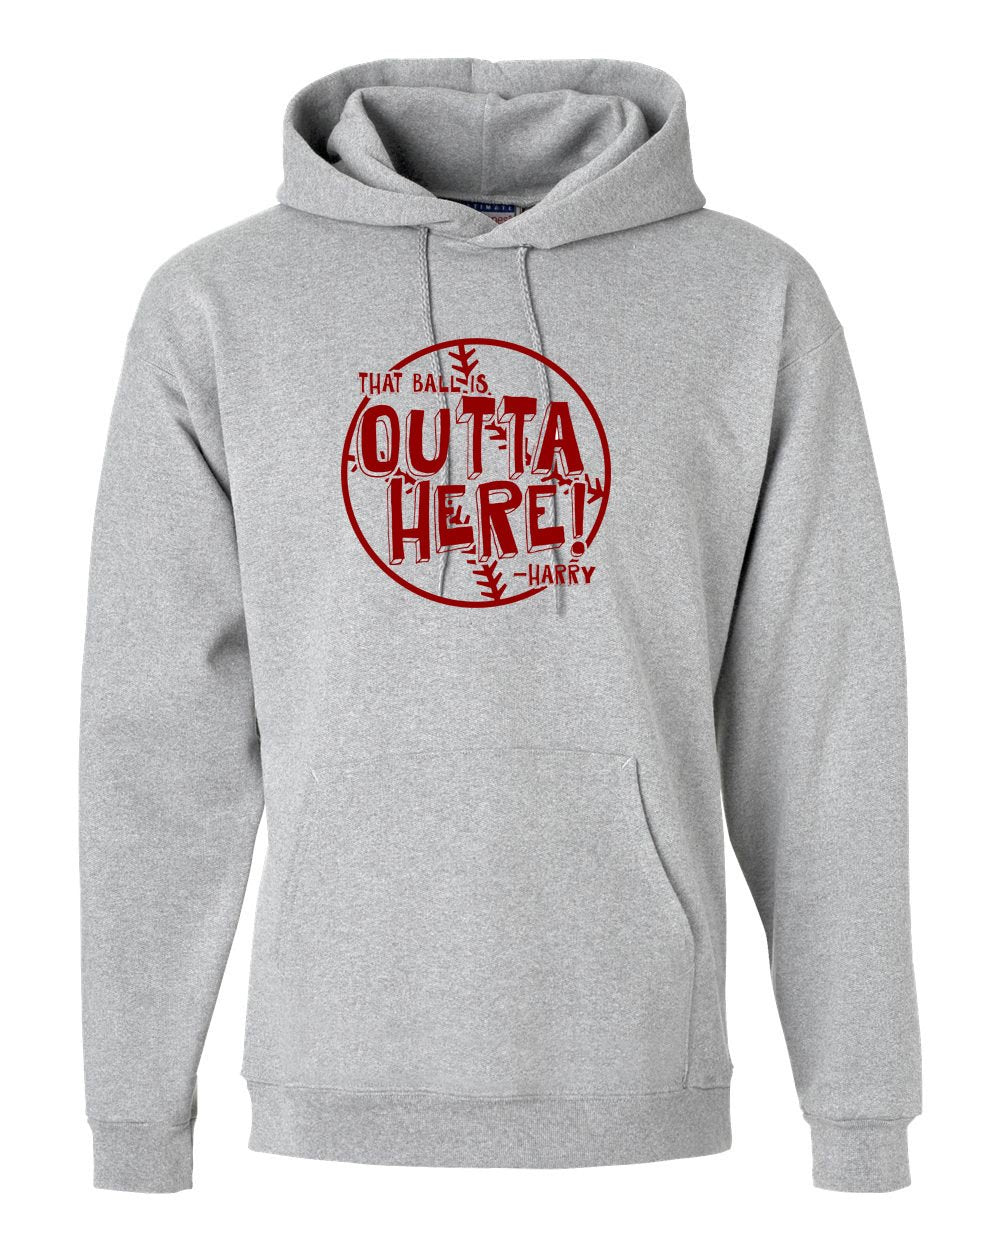 It's Outta Here (Version 2) Hoodie